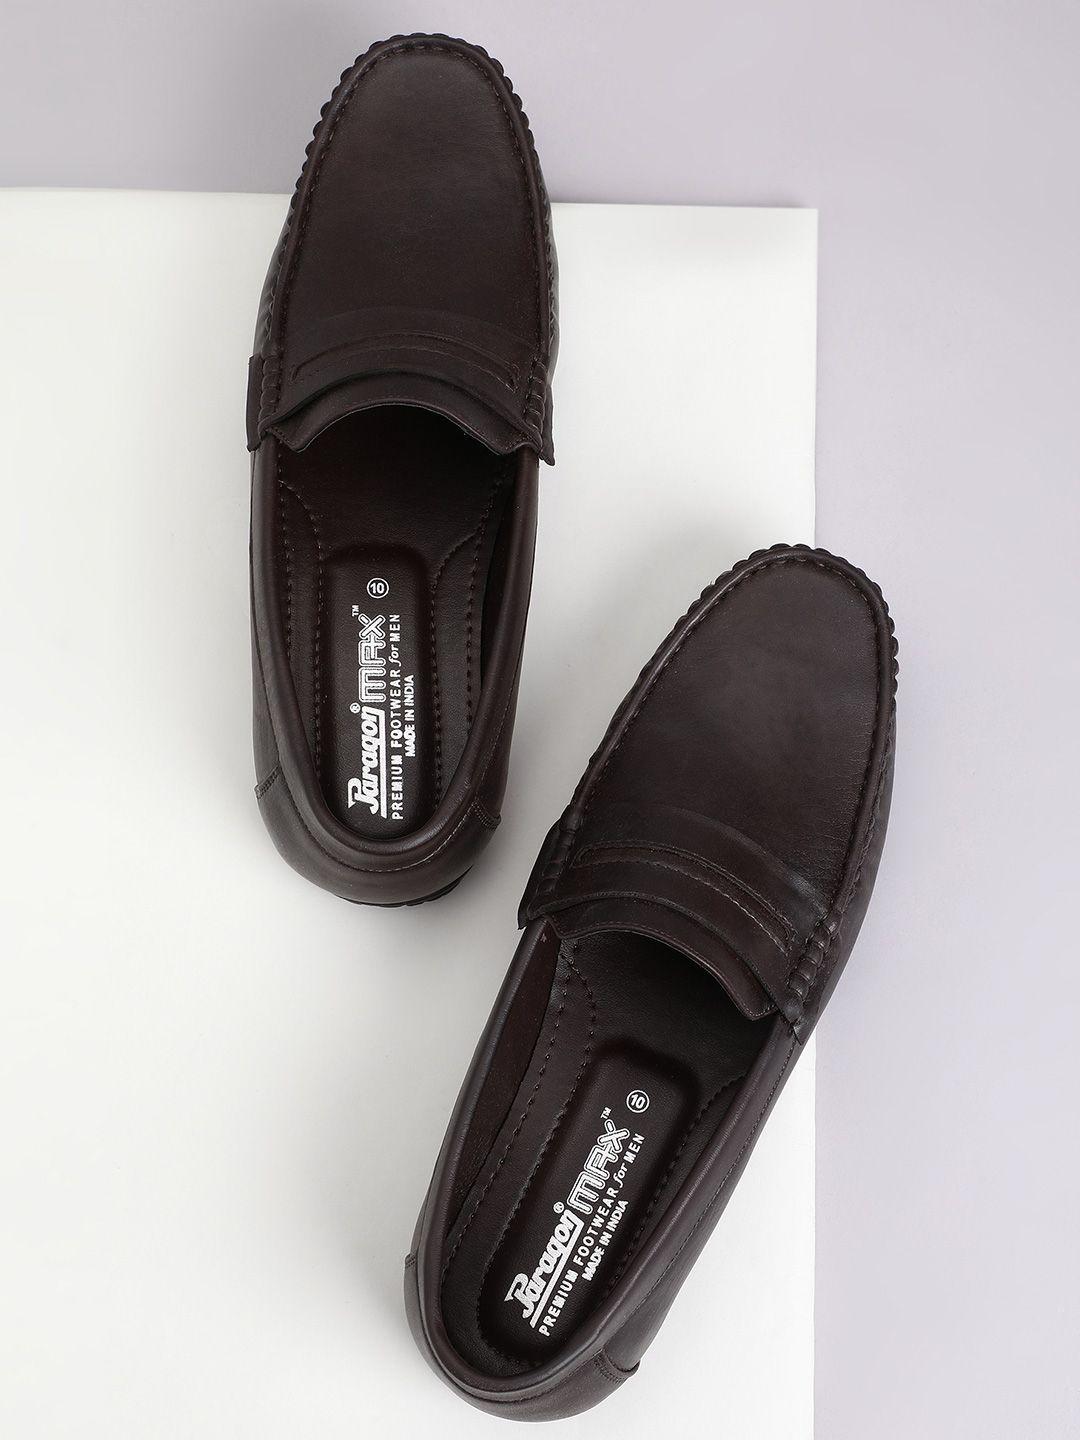 paragon-men-anti-skid-sole-formal-loafers